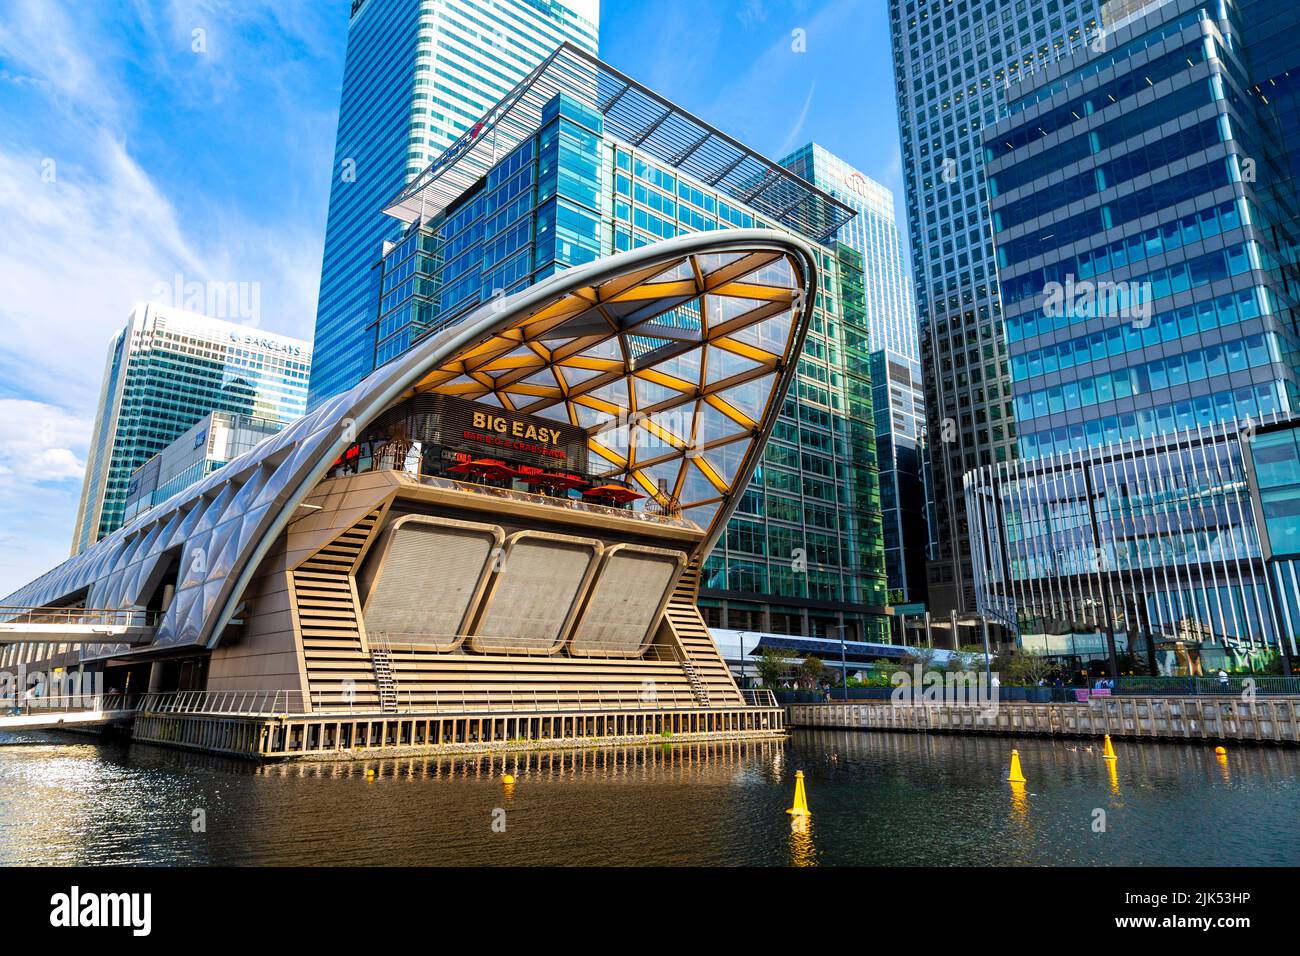 Canary Wharf Crossrail Station with skyscrapers in the background, London, UK Stock Photo